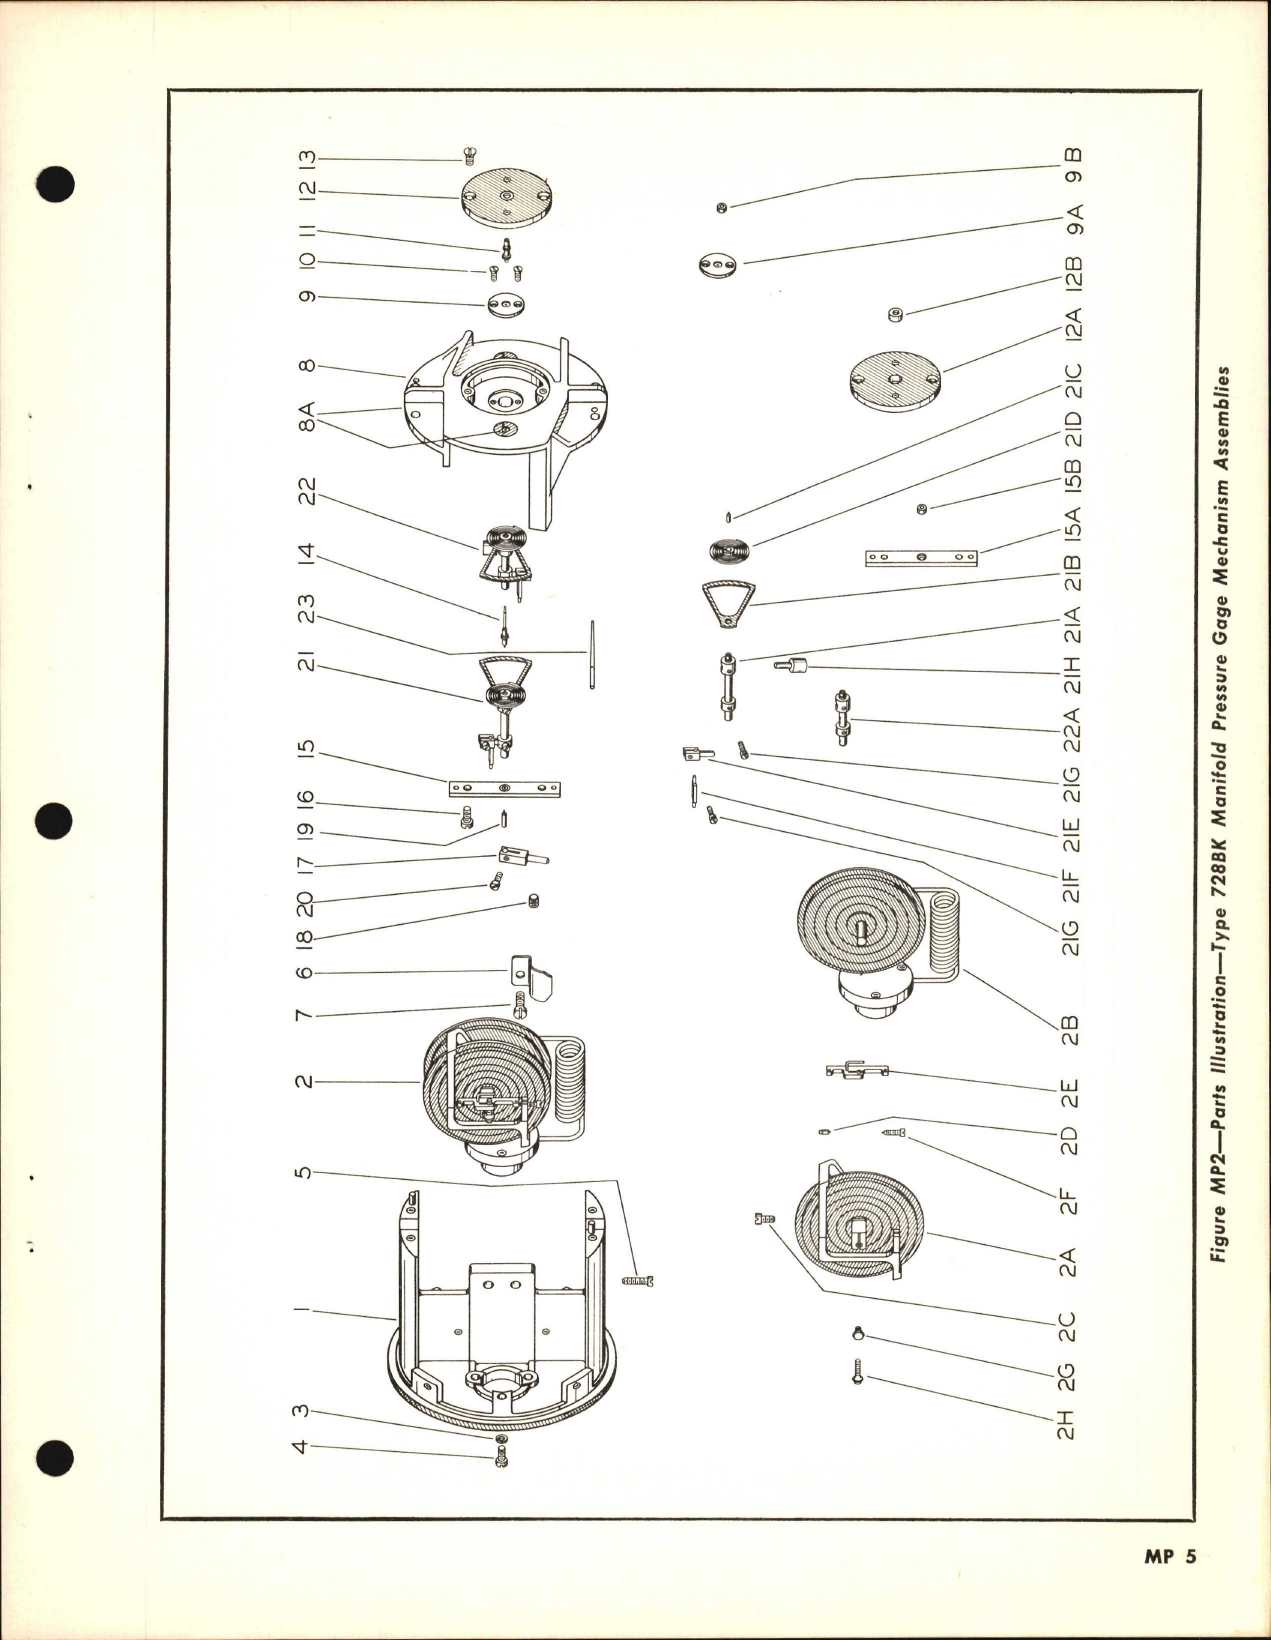 Sample page 5 from AirCorps Library document: Parts Catalog for Kollsman Dual Manifold Pressure Gage